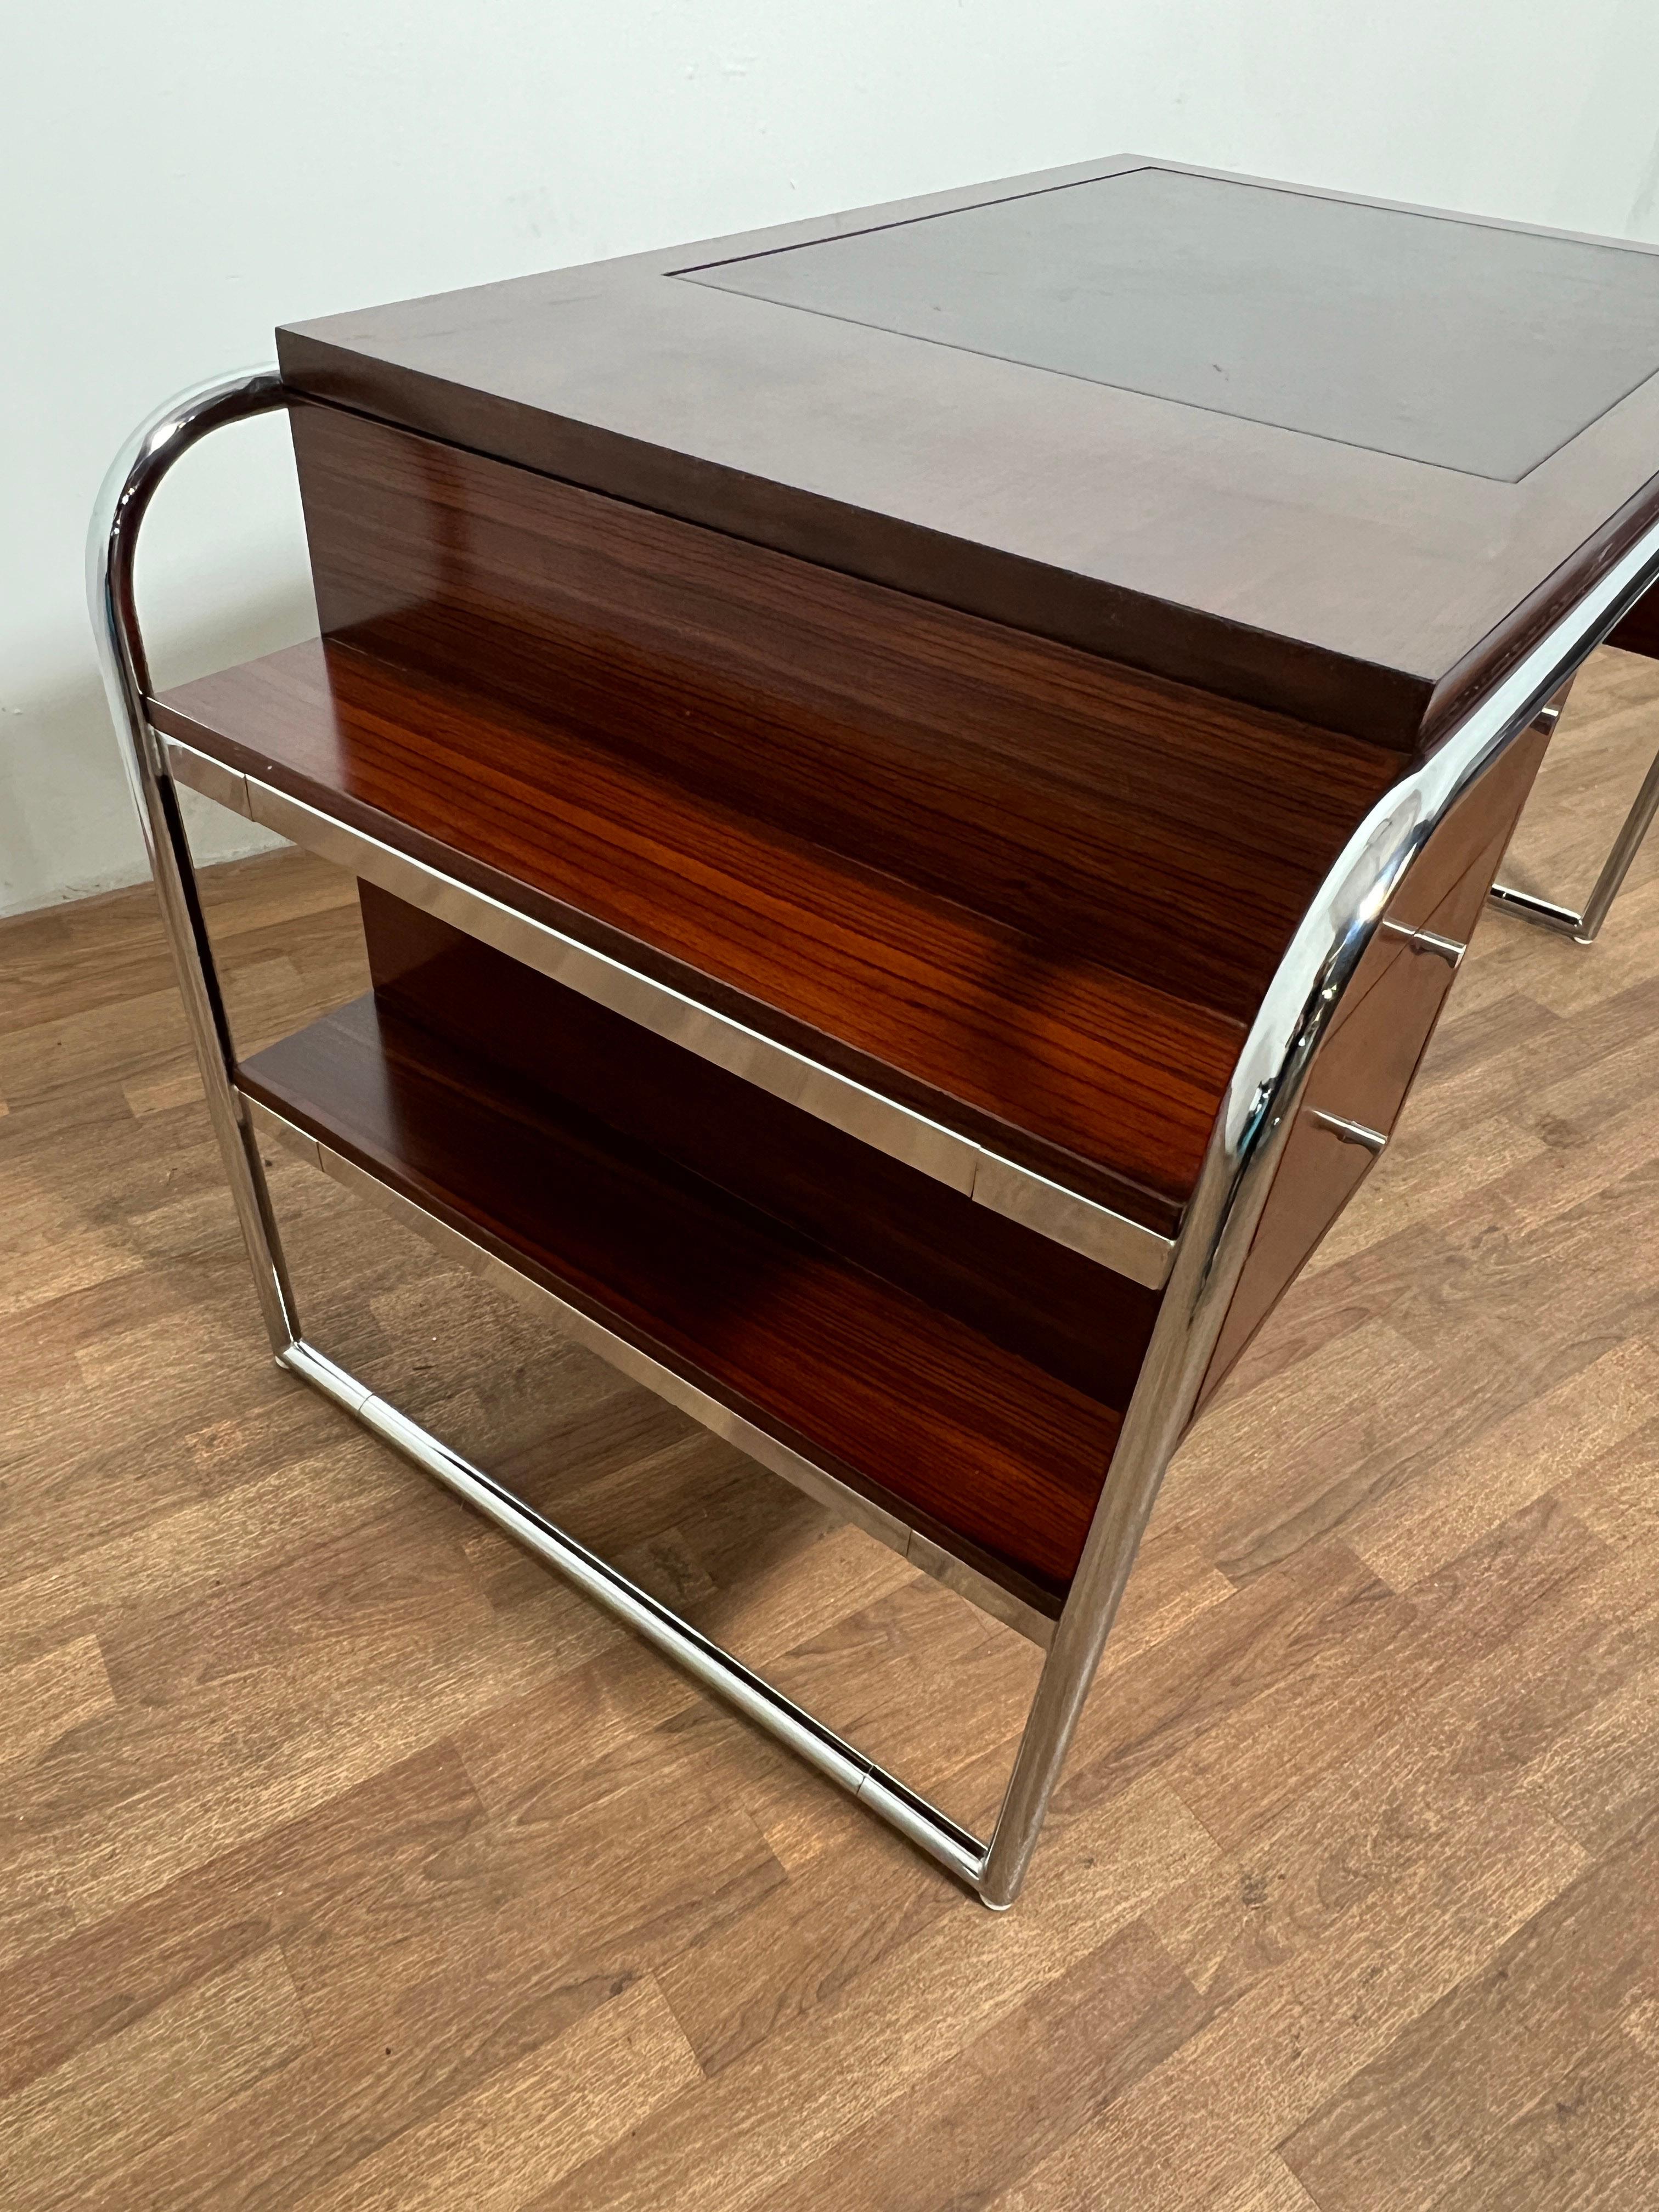 Ralph Lauren Bauhaus Inspired Desk in Rosewood, Chrome and Leather For Sale 5